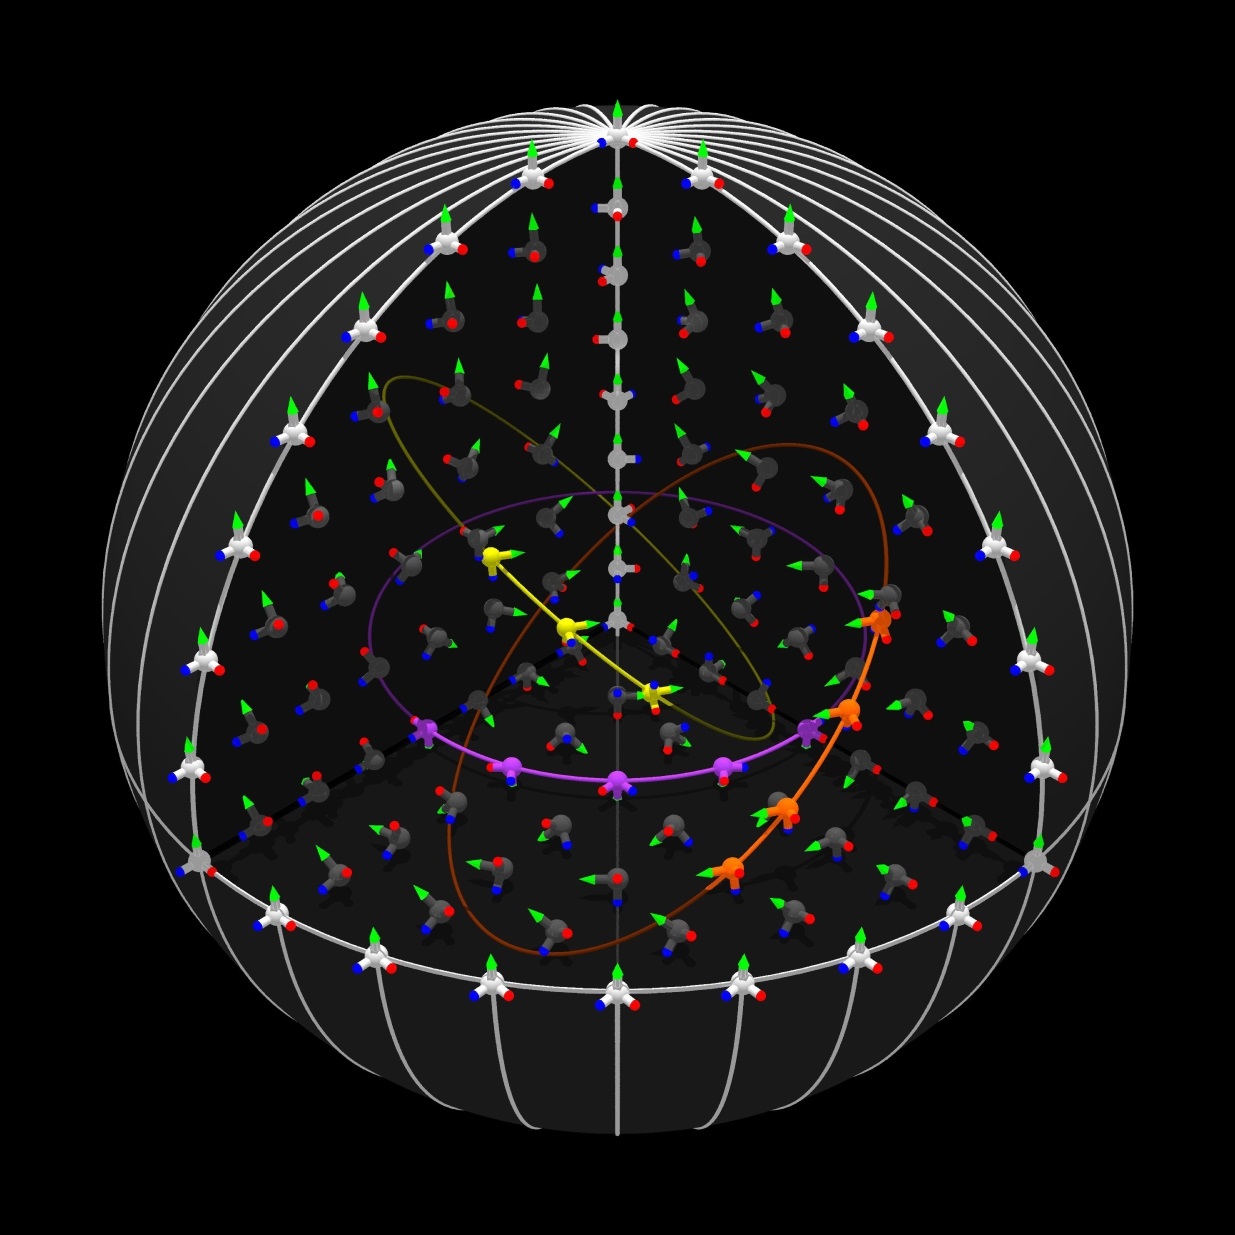 Cutaway view of the 3D skyrmion spin structure